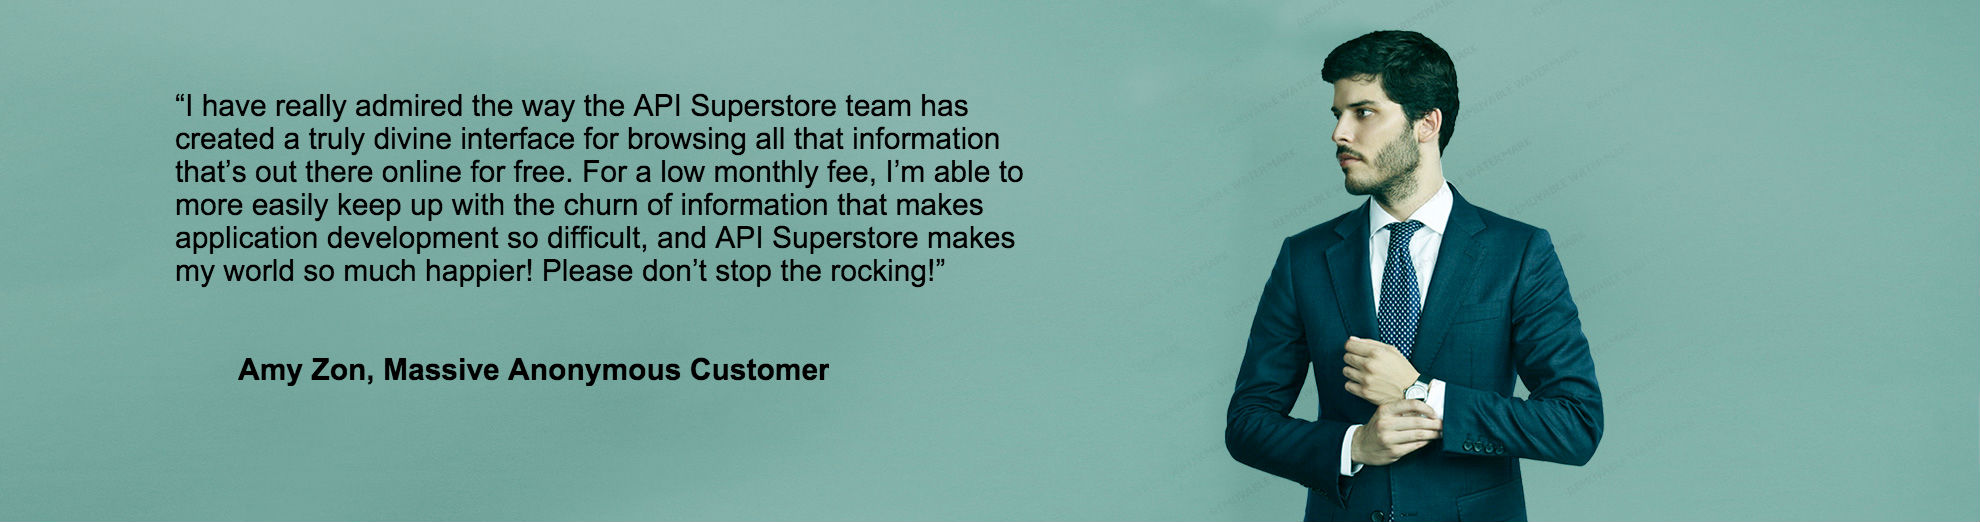 Customer testimonial: I have really admired the way the API Superstore team has created a truly divine interface for
					browsing all that information that’s out there online for free. For a low monthly fee, I’m able to
					more easily keep up with the churn of information that makes application development so
					difficult, and API Superstore makes my world so much happier! Please don’t stop the rocking!
					- Amy Zon, Massive Anonymous Customer